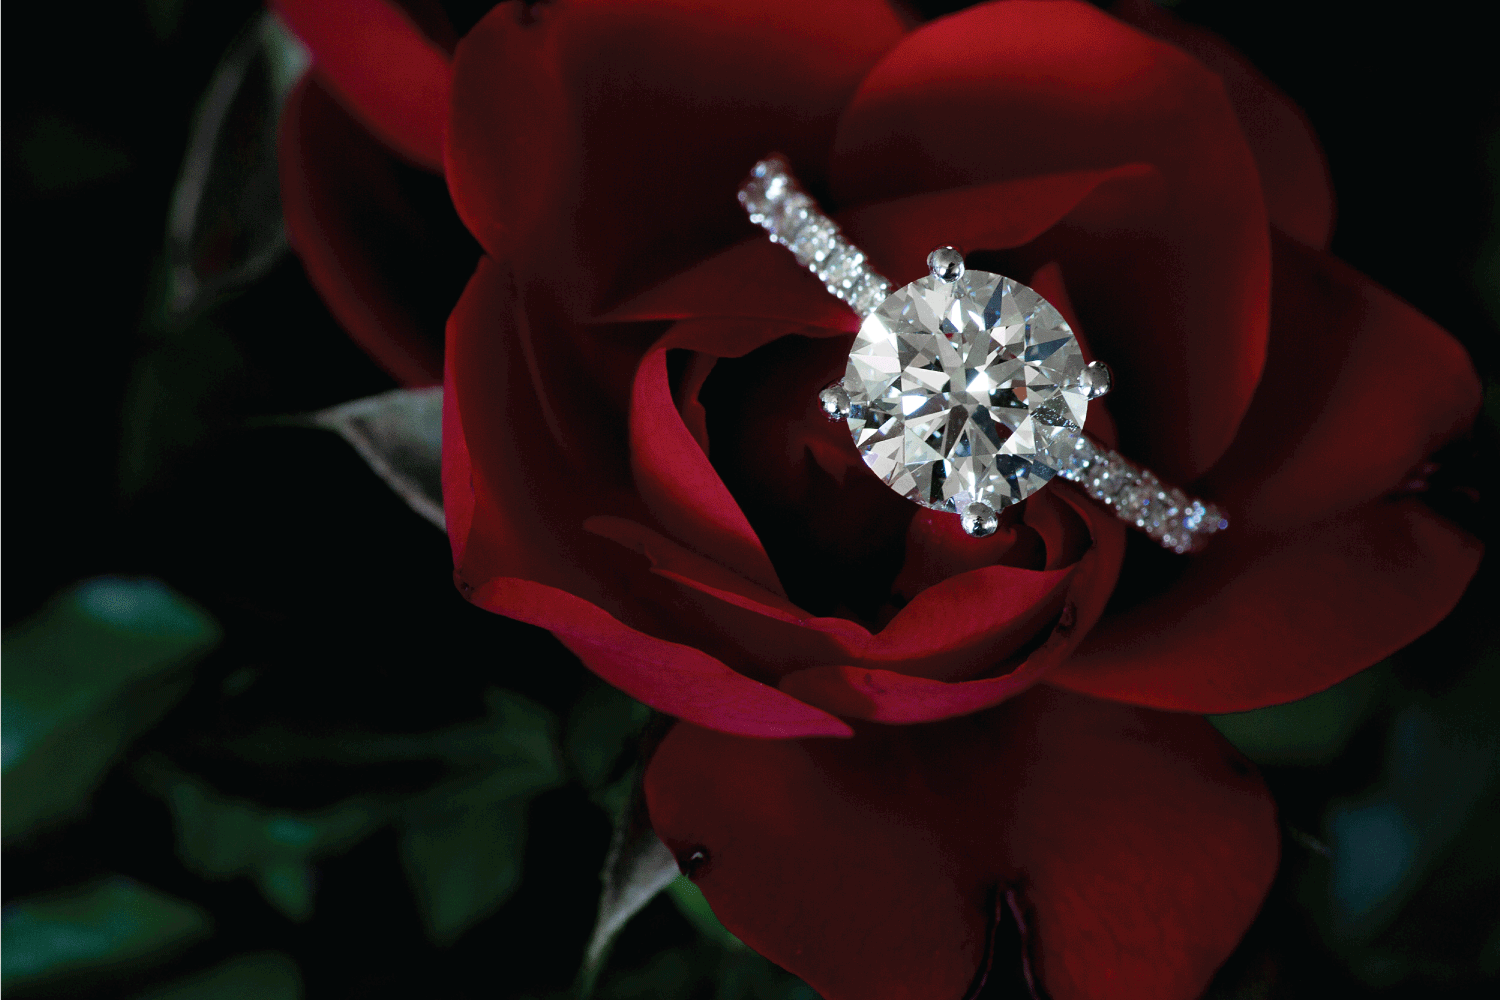 1.5 Carat Diamond Ring On Red Rose And Green Stem Leaves